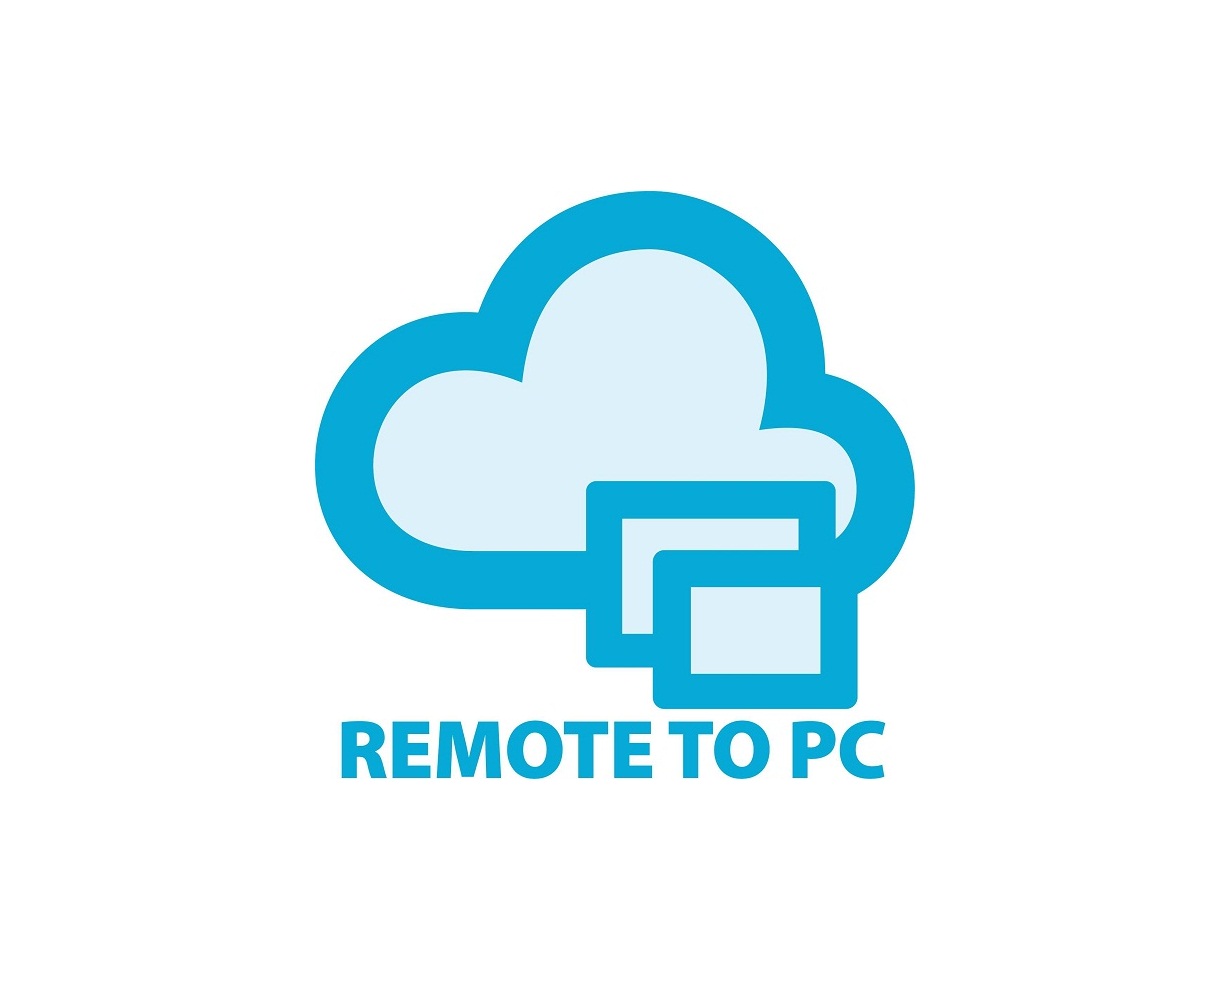 RemoteToPC provides monitoring and remote control tools for IT people